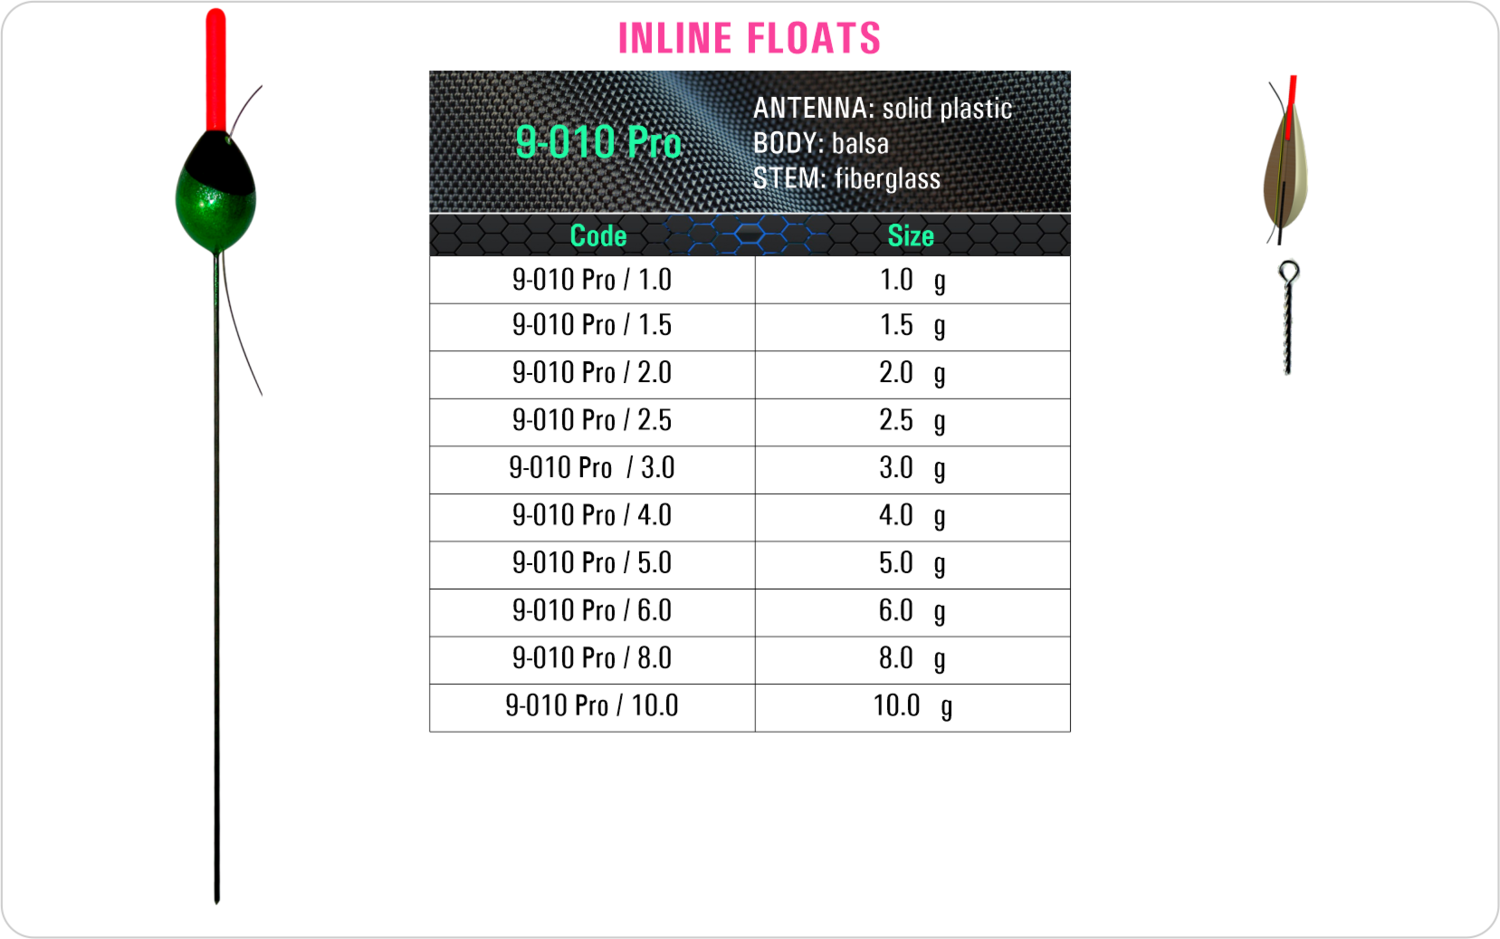 SF 9-010 Pro - Lake and river float model and table containing an additional information about this float with different codes, sizes, types of the body, the stem and the antenna of the float.